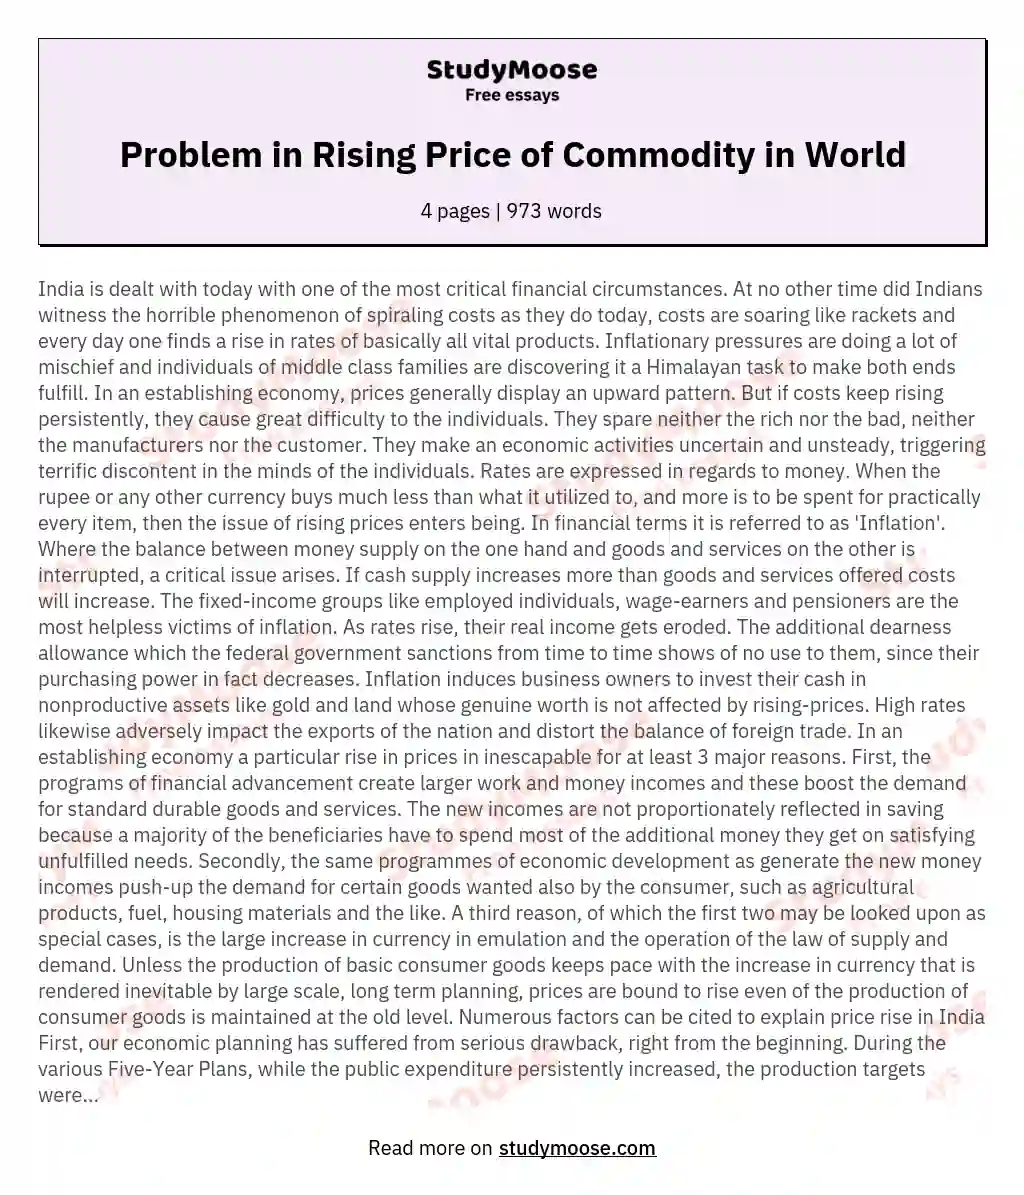 Problem in Rising Price of Commodity in World